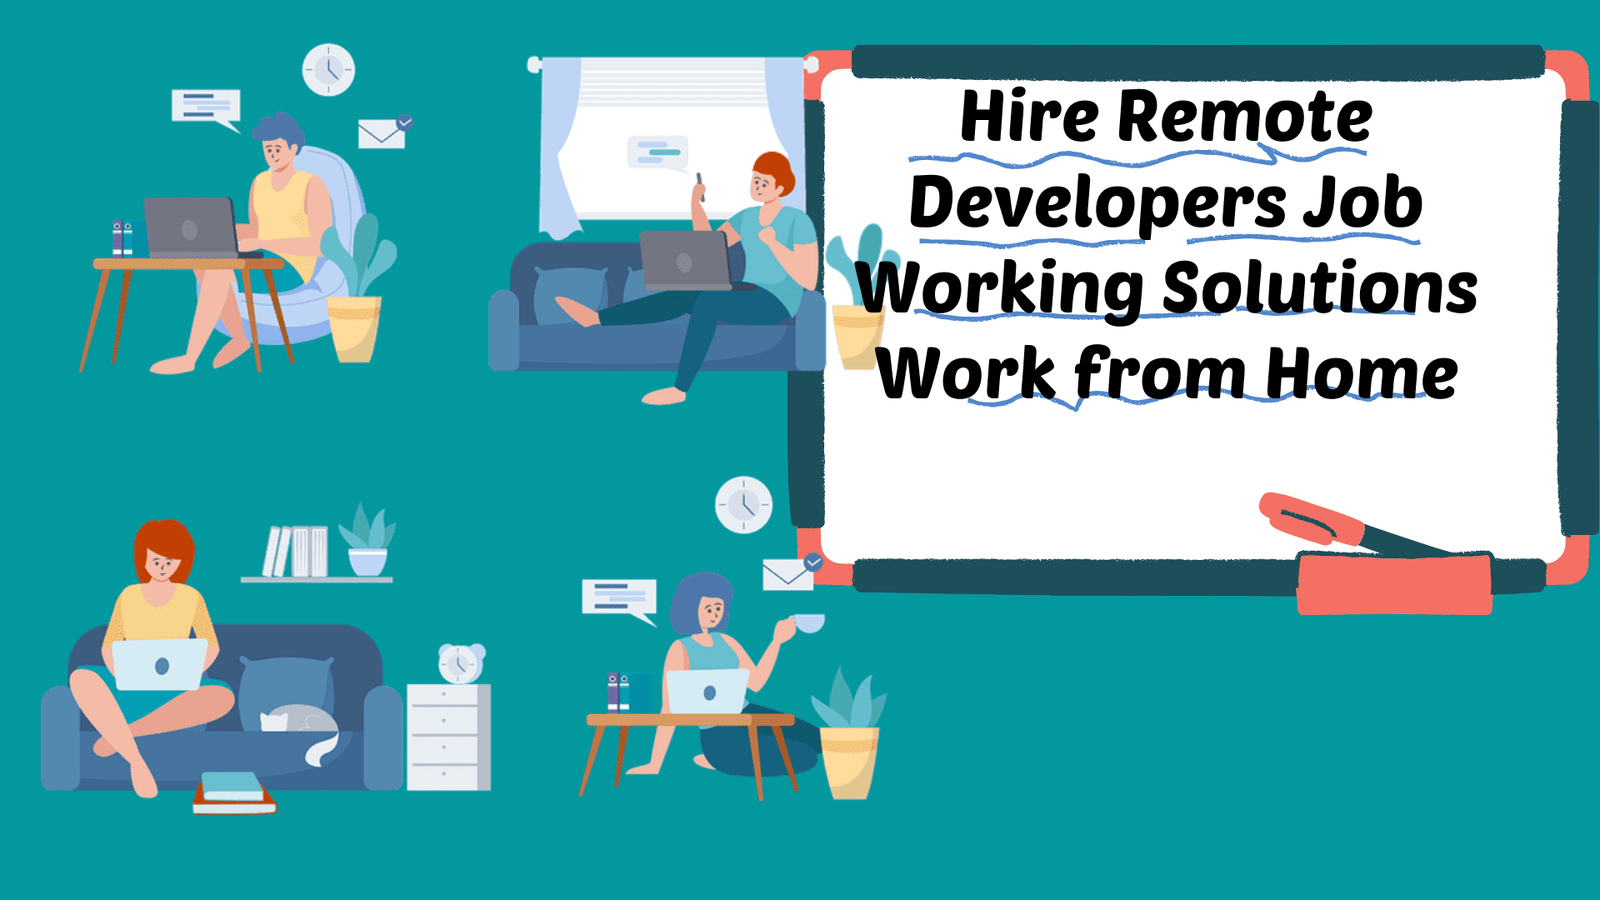 Hire Remote Developers Job Working Solutions Work from Home Image